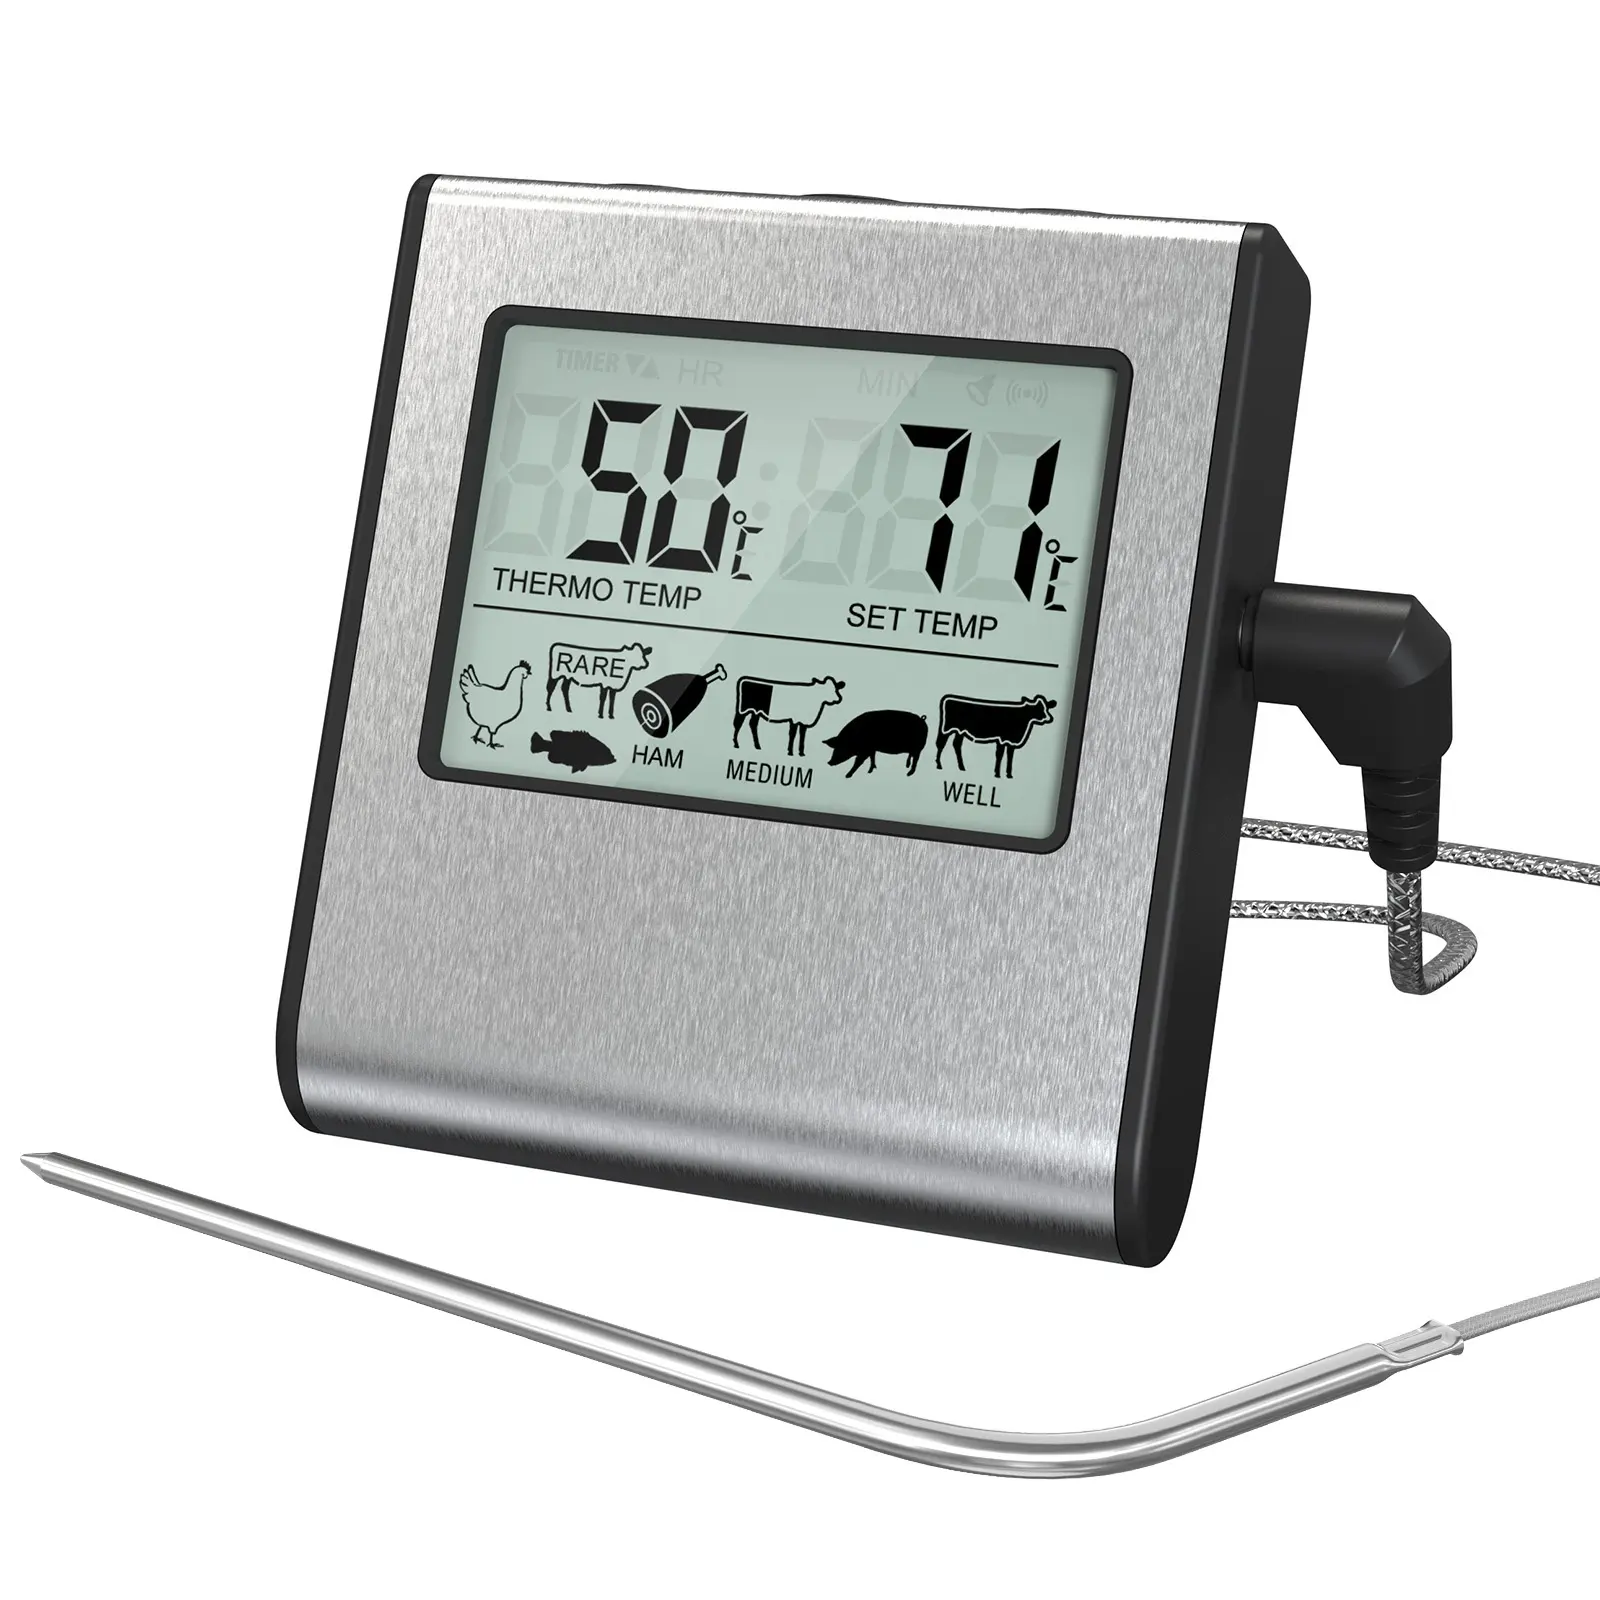 KH-TH047 Large LCD Digital Cooking Food Meat Smoker Oven Kitchen BBQ Grill Thermometer with Timer Stainless Steel Probe